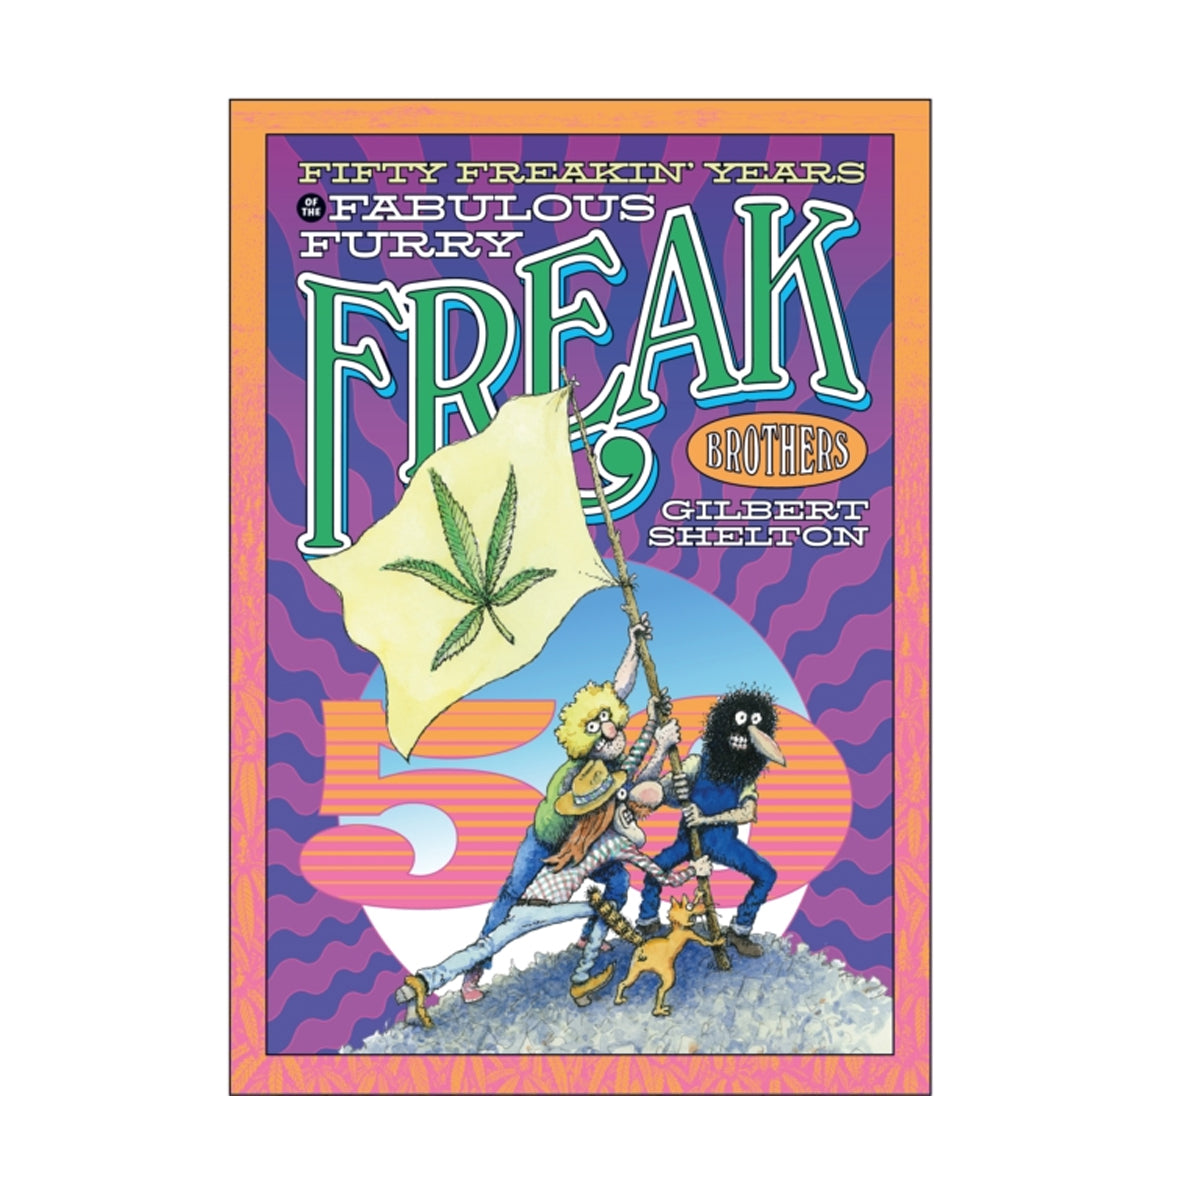 Book - Fifty Freakin Years with the Fabulous Furry Freak Brothers